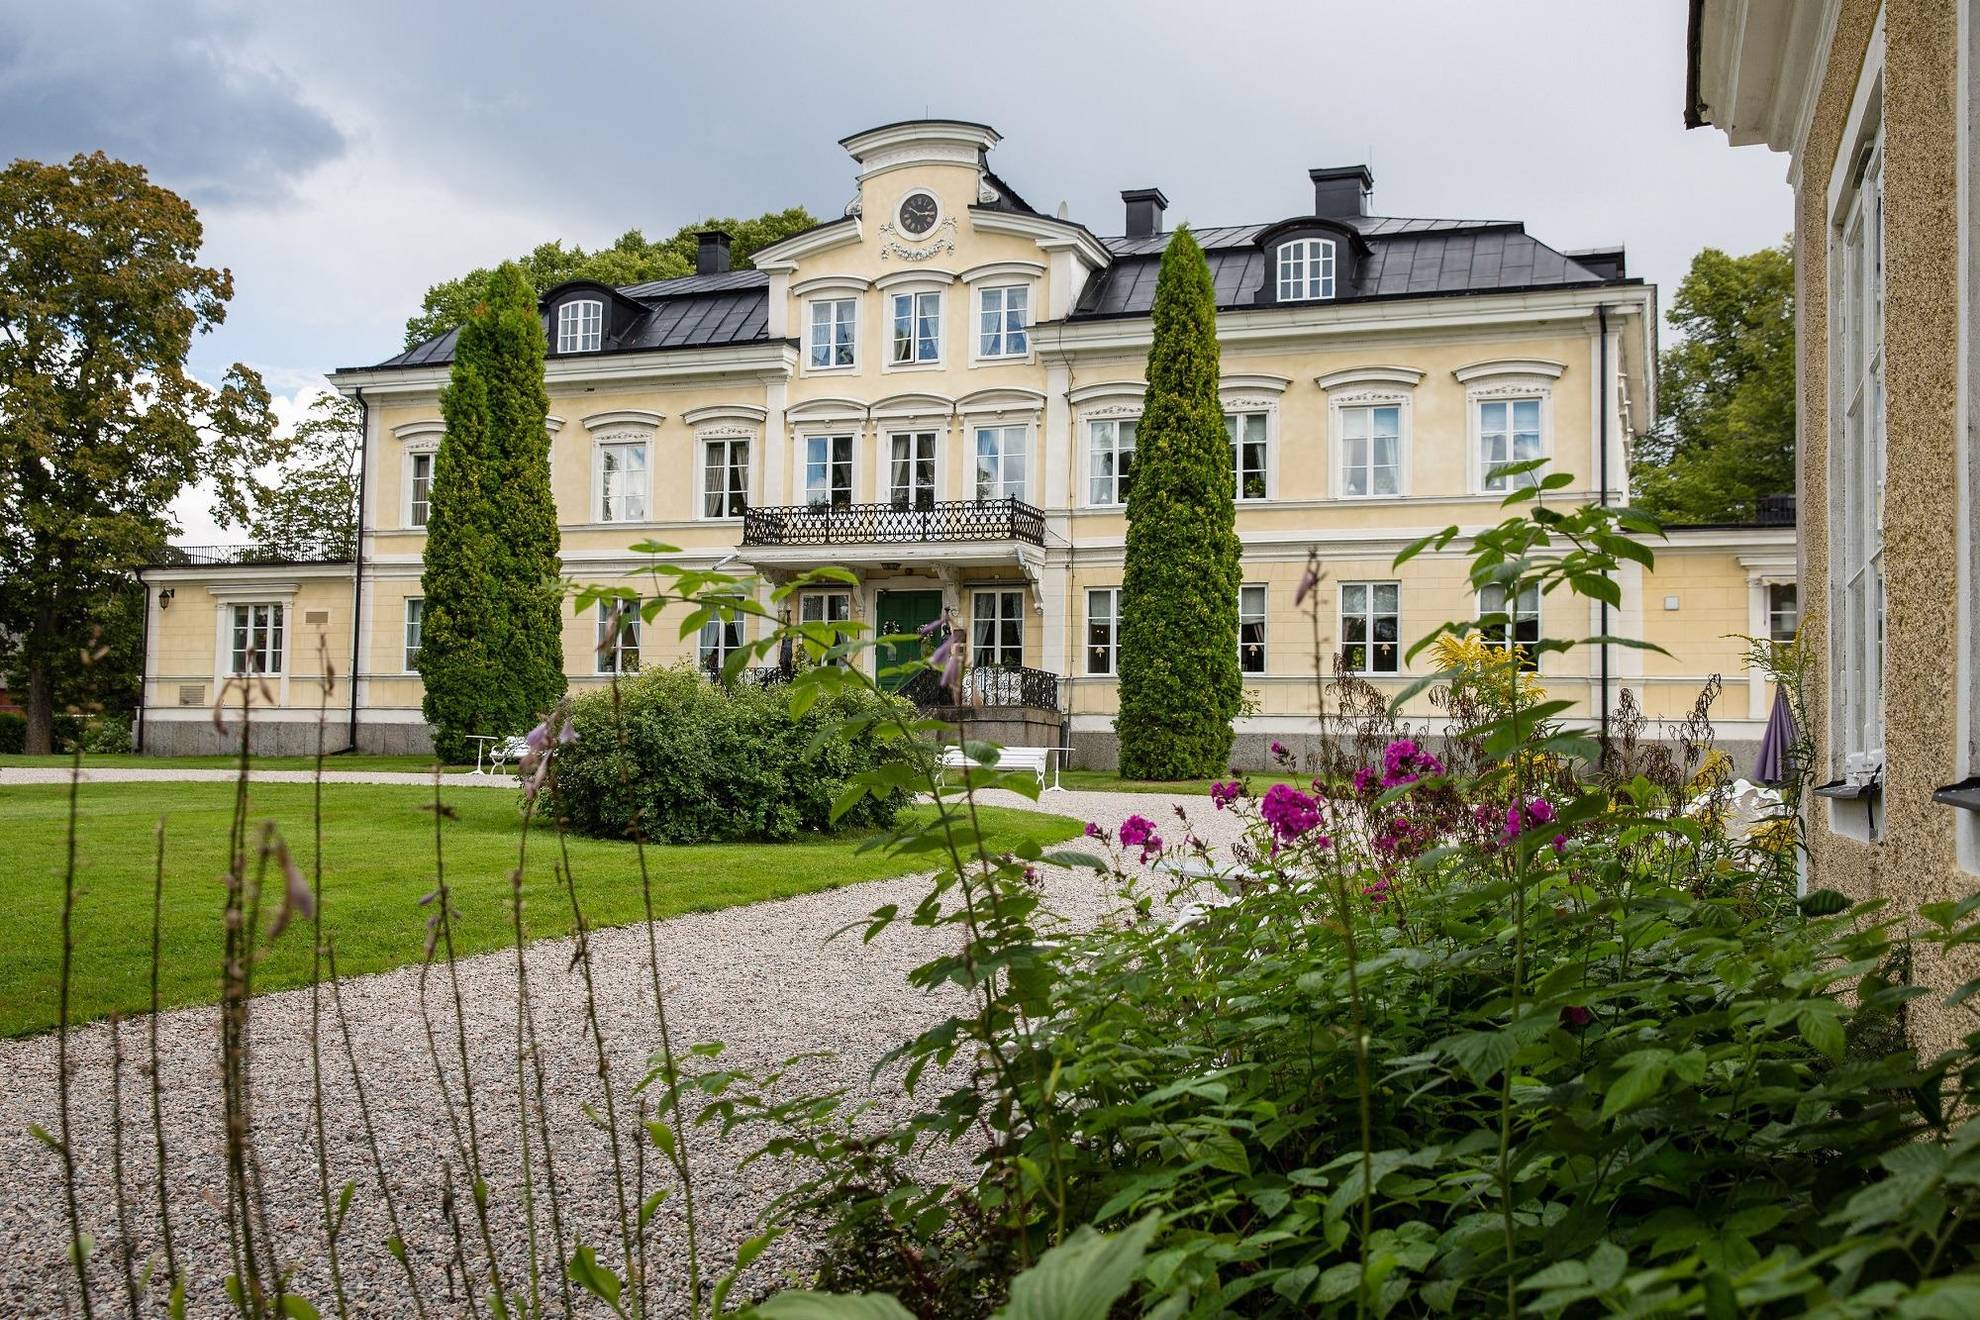 The building of Färna manor surrounded by greenery during a summer day.